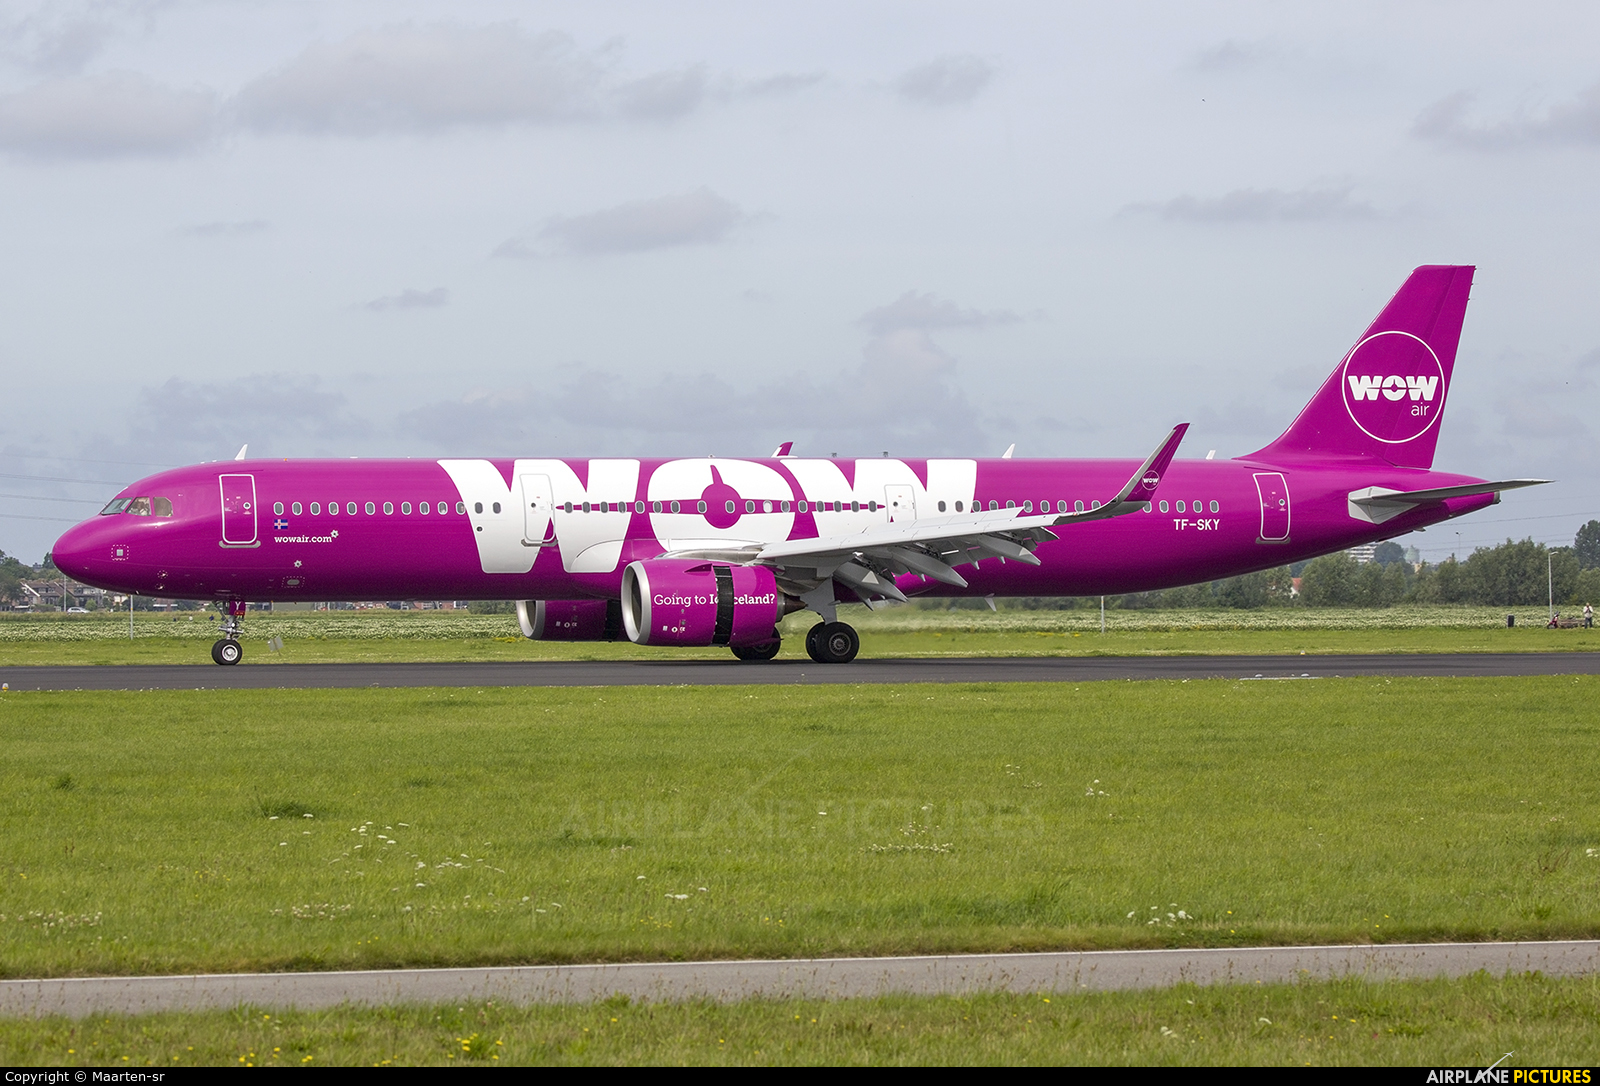 TF-SKY - WOW Air Airbus A321 NEO at Amsterdam - Schiphol | Photo ID ...